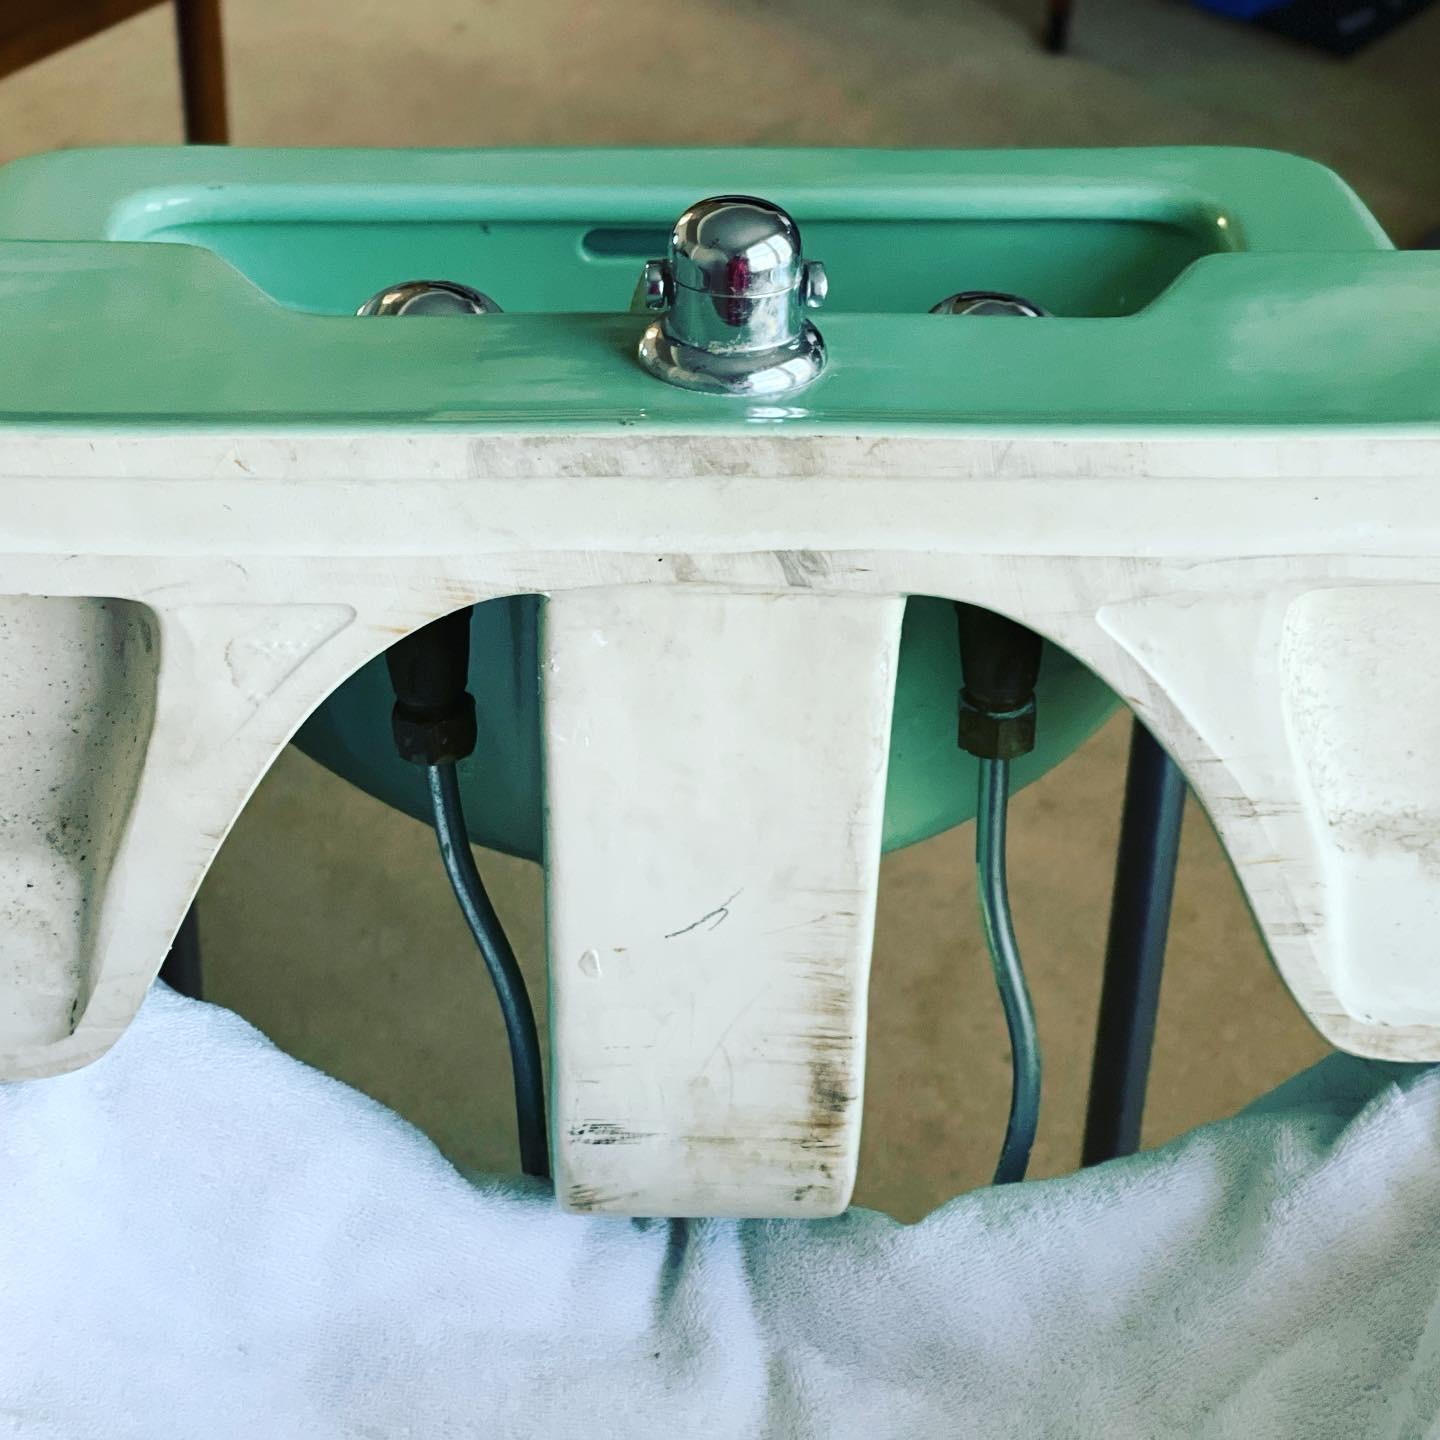 20th Century Stunning Crane “Drexel” Sink in Jade, Featuring Chrome Towel Bars and Legs